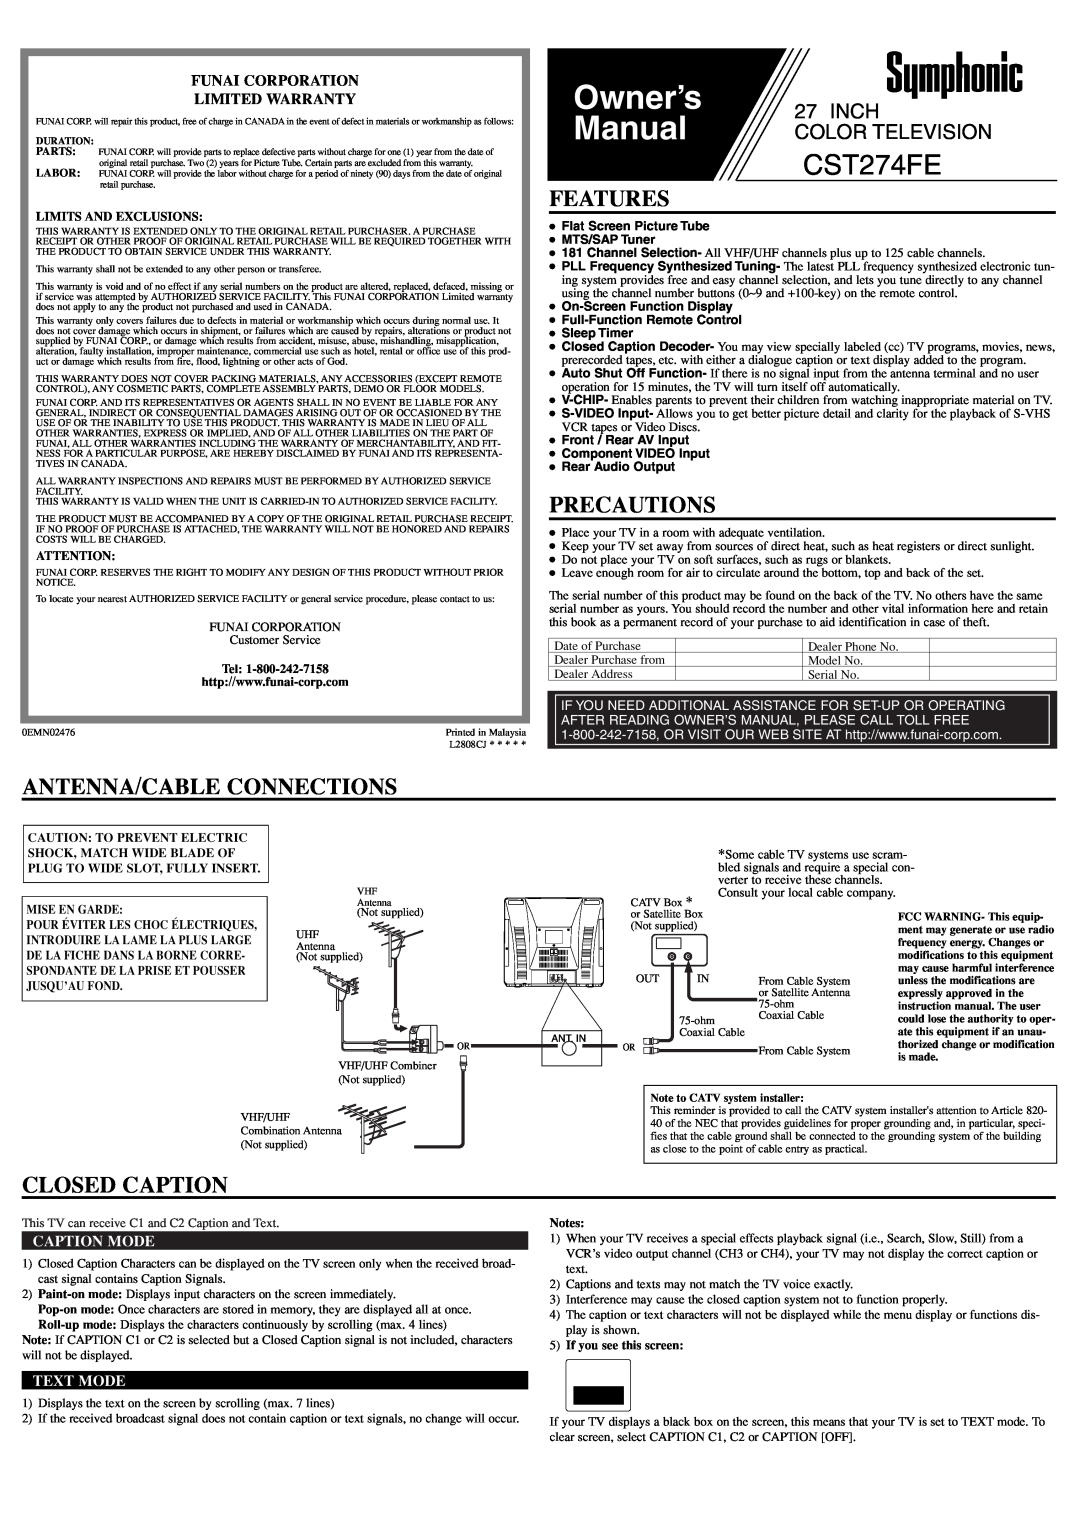 Symphonic CST274FE owner manual Features, Precautions, Antenna/Cable Connections, Closed Caption, Caption Mode, Text Mode 